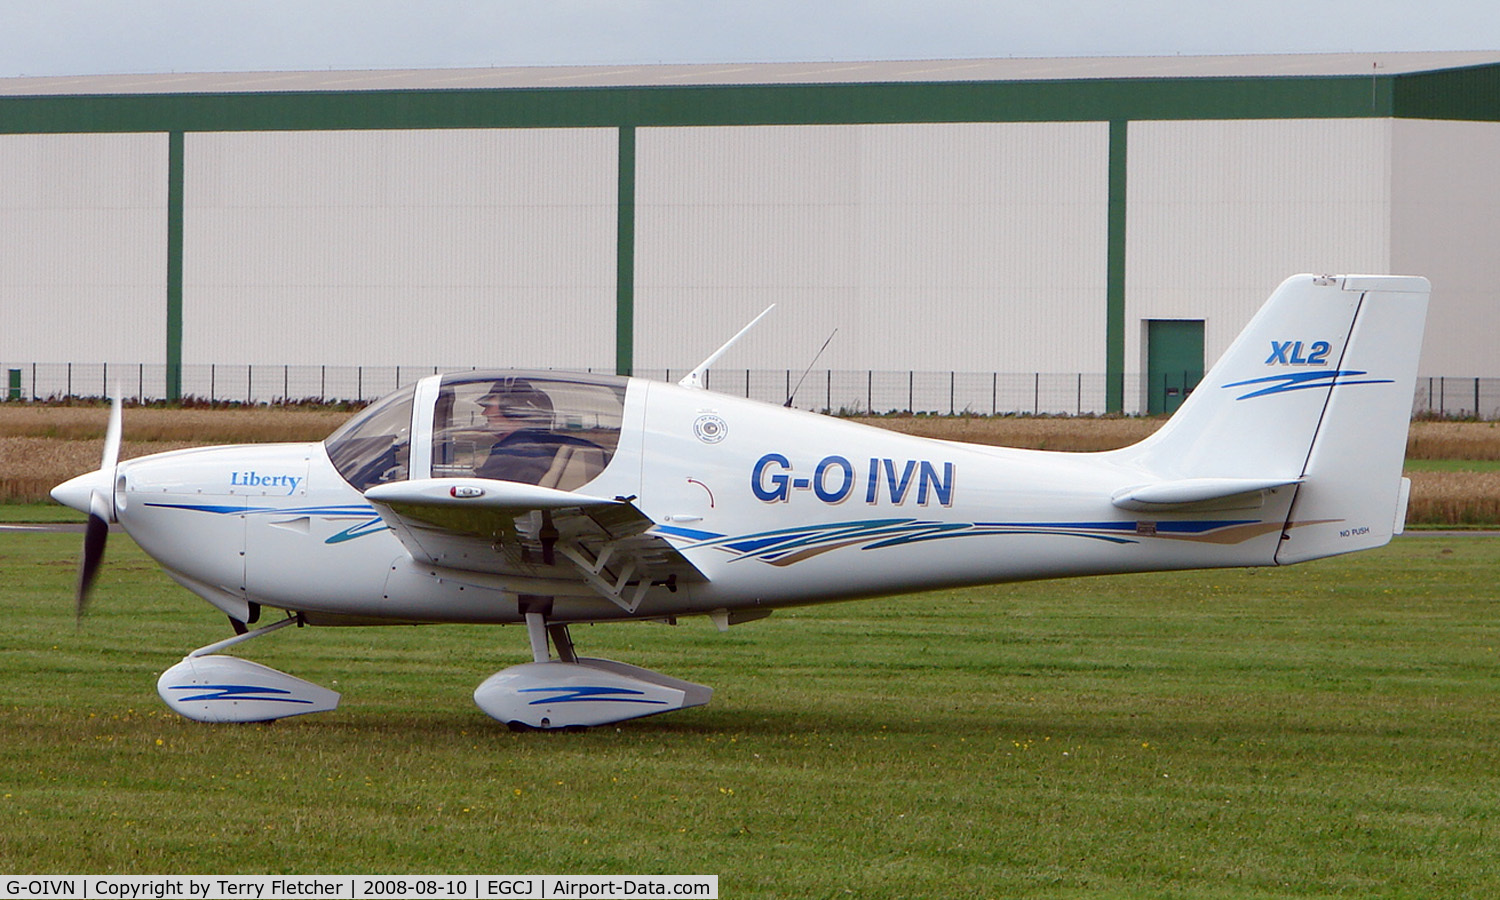 G-OIVN, 2005 Liberty XL-2 C/N 0008, Visitor to the 2008 LAA Regional Fly-in at Sherburn